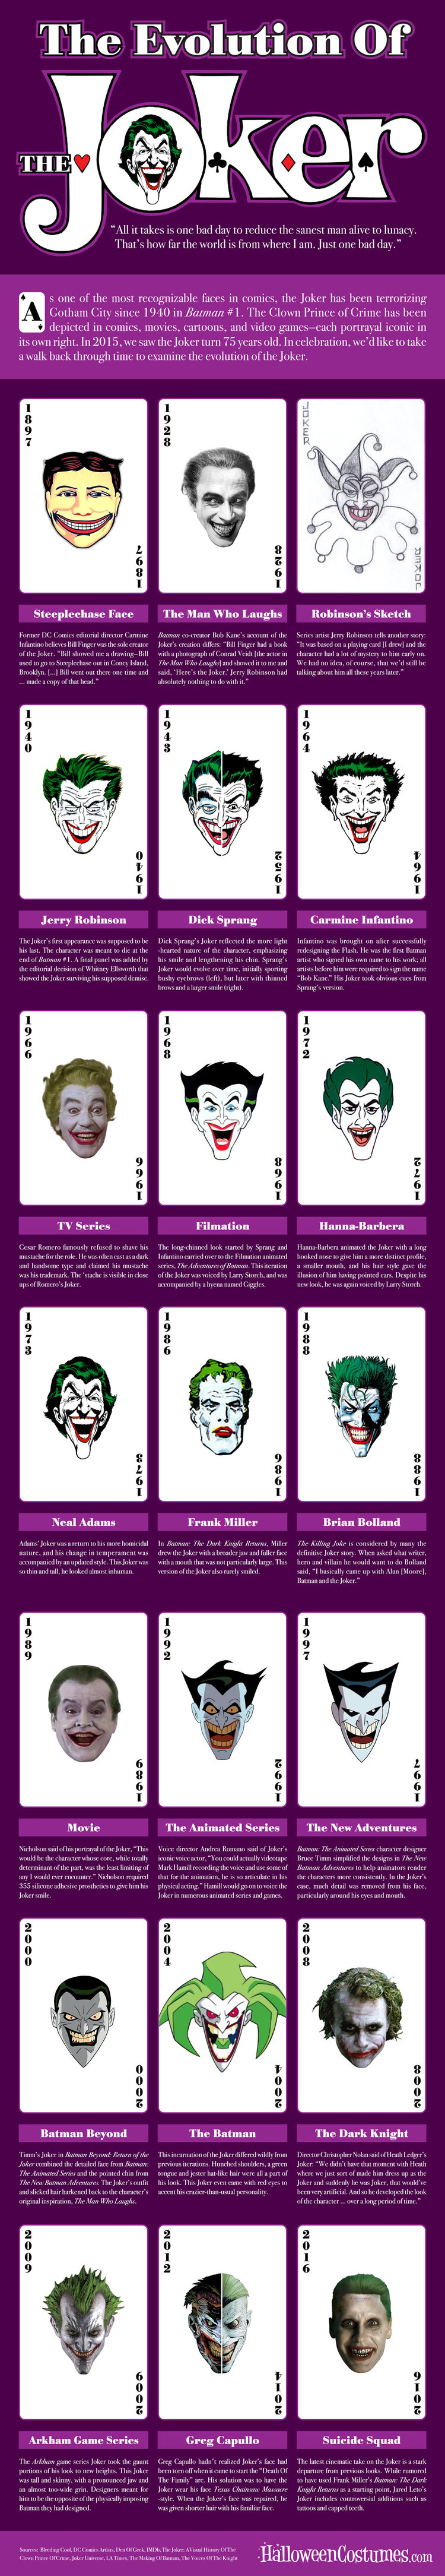 infographic-the-evolution-of-the-joker-in-comics-television-and-film-social